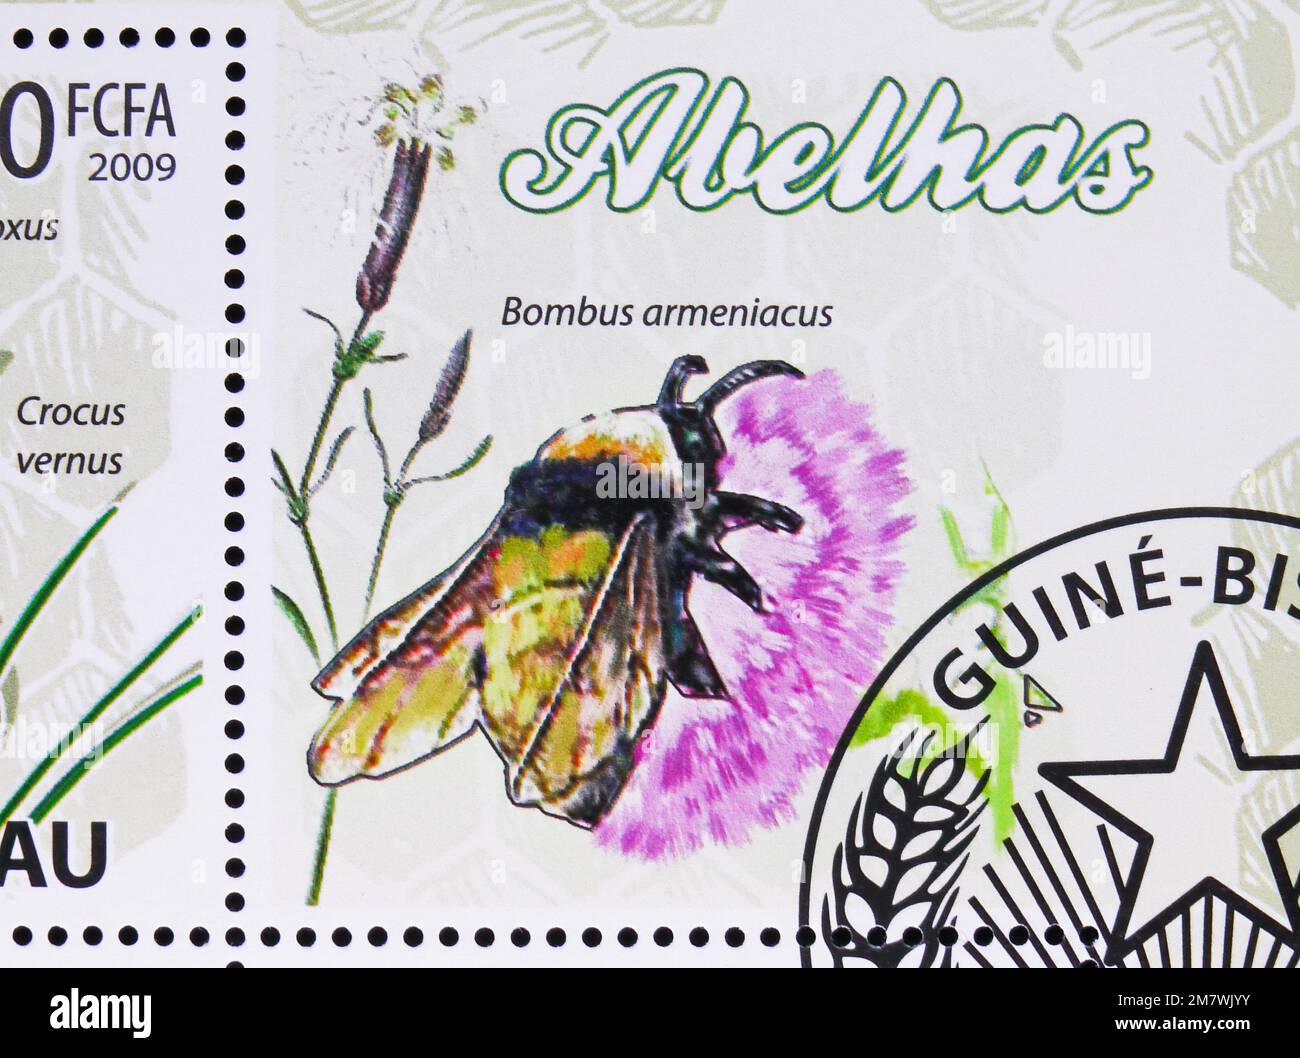 MOSCOW, RUSSIA - JULY 12, 2022: Postage stamp printed in Guinea-Bissau shows Bombus armeniacus, serie, circa 2009 Stock Photo